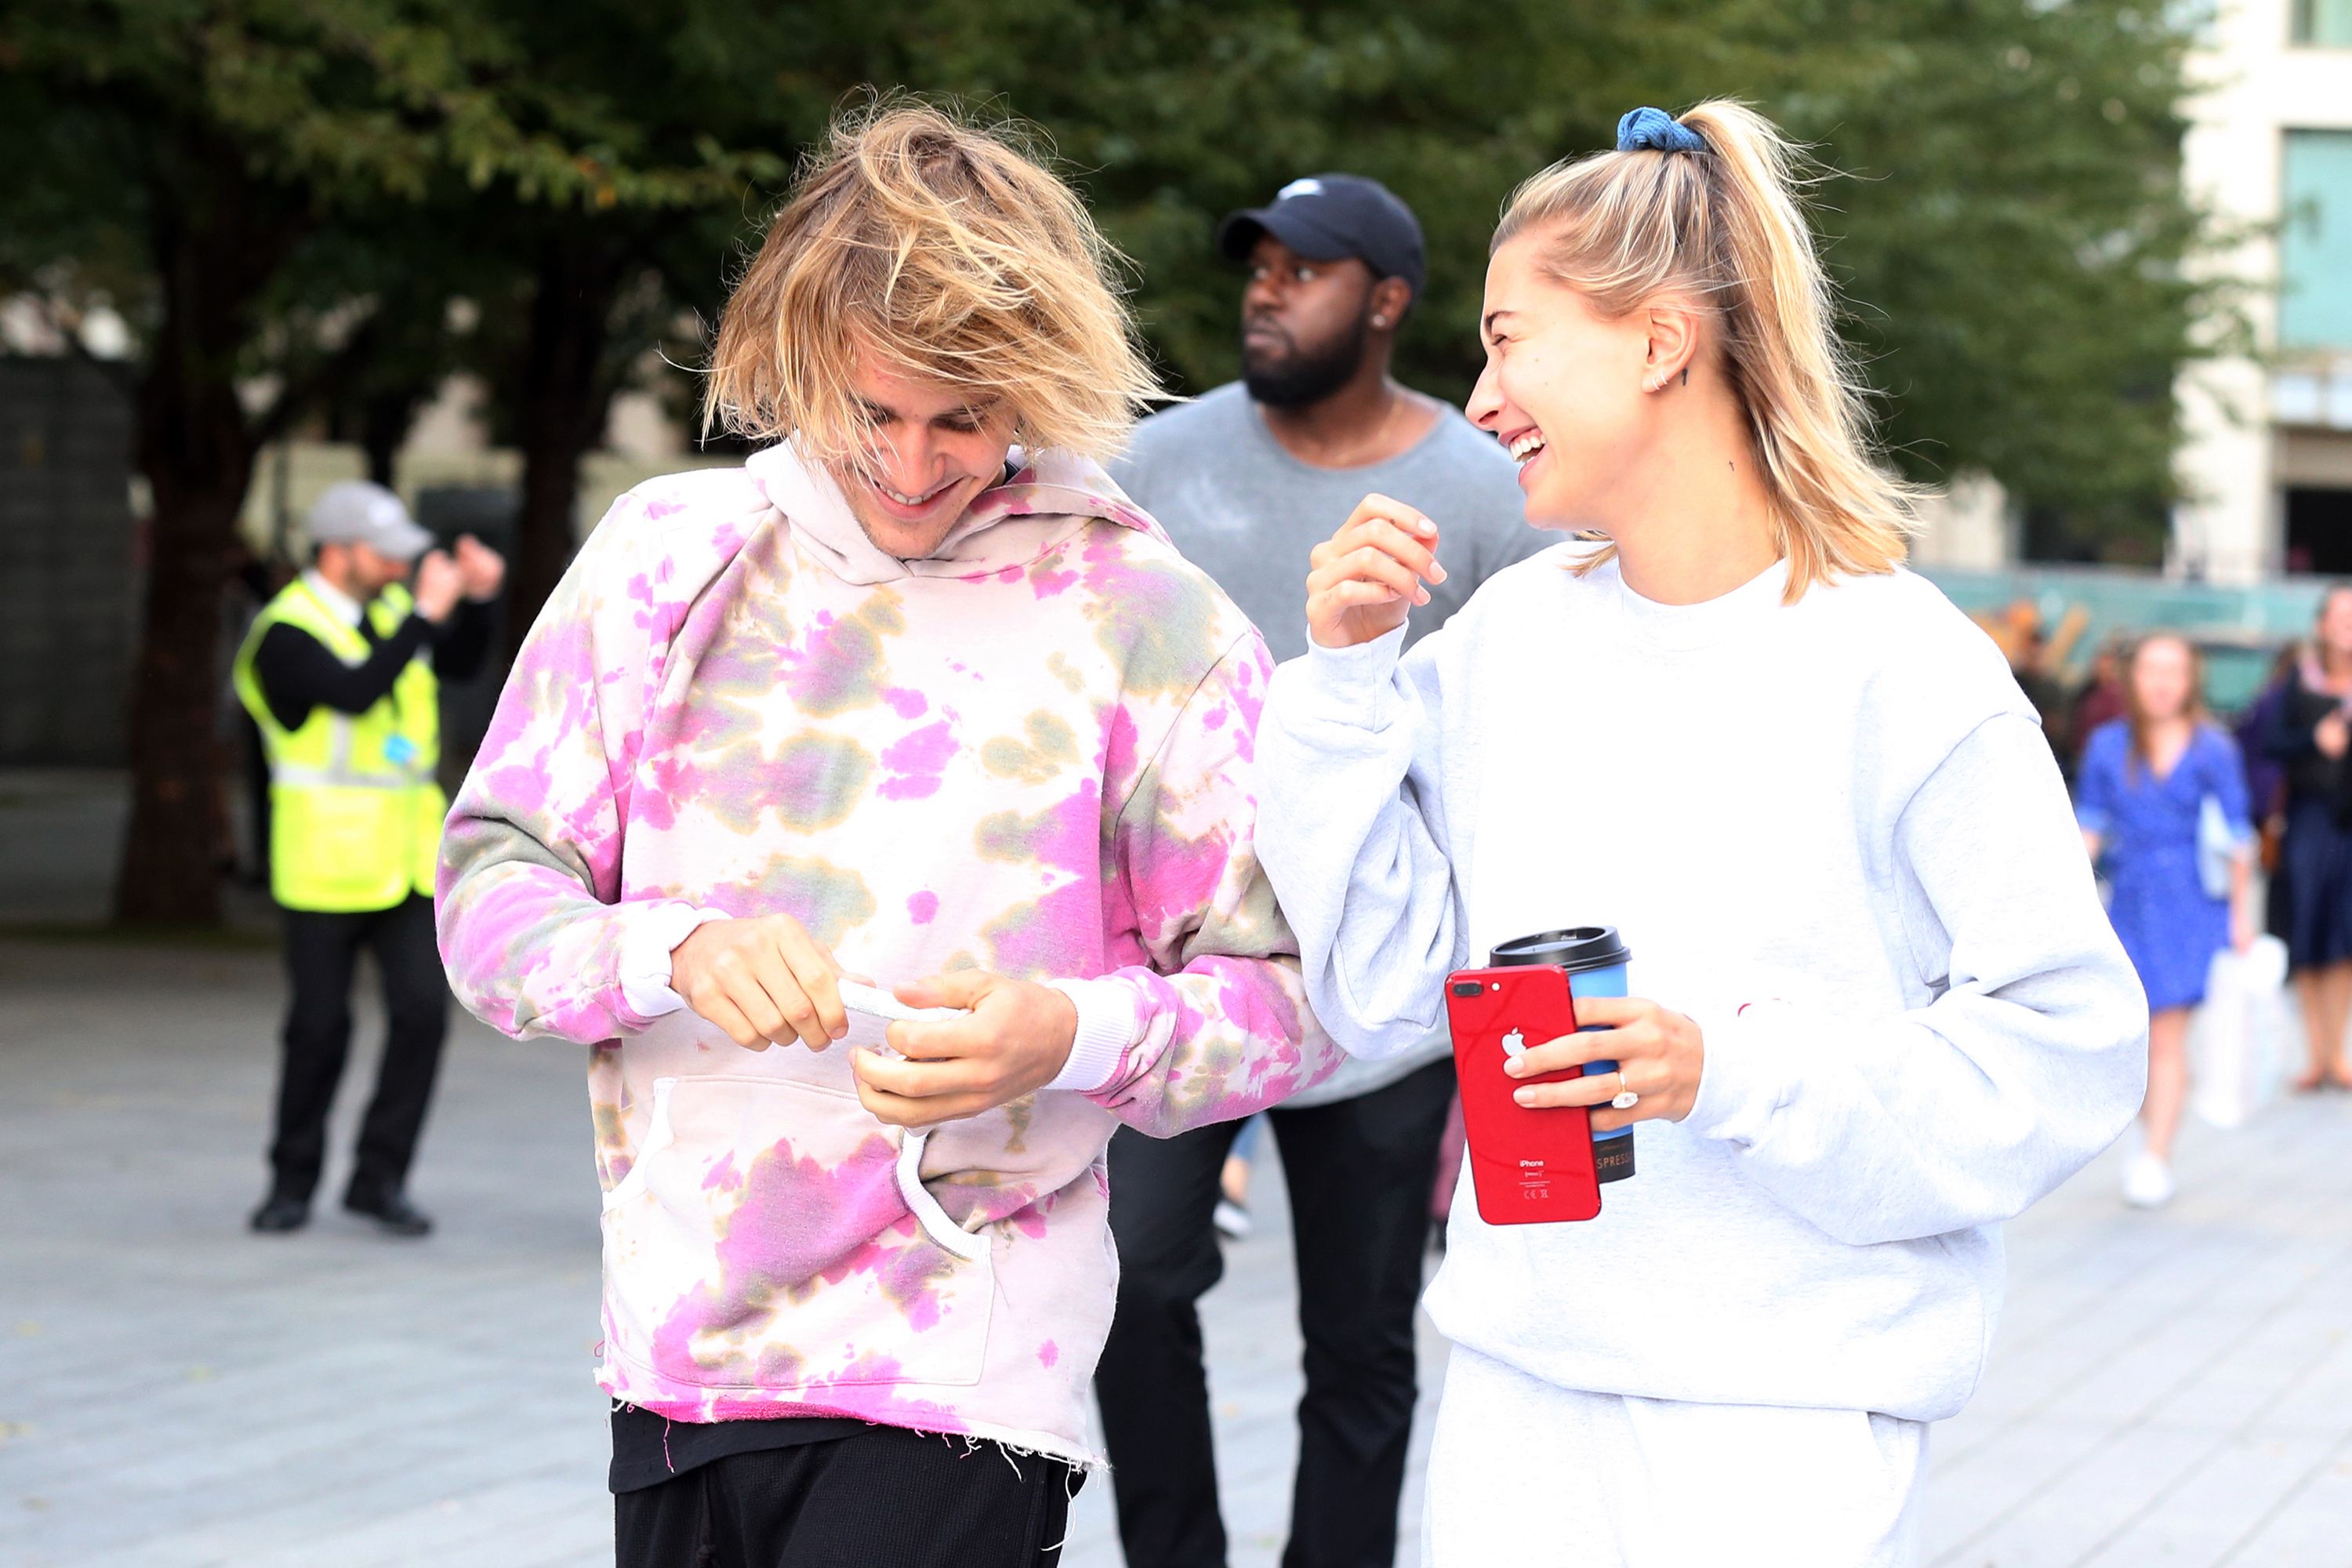 Justin Bieber Sings to Hailey Baldwin, Calls Her Love of His Life